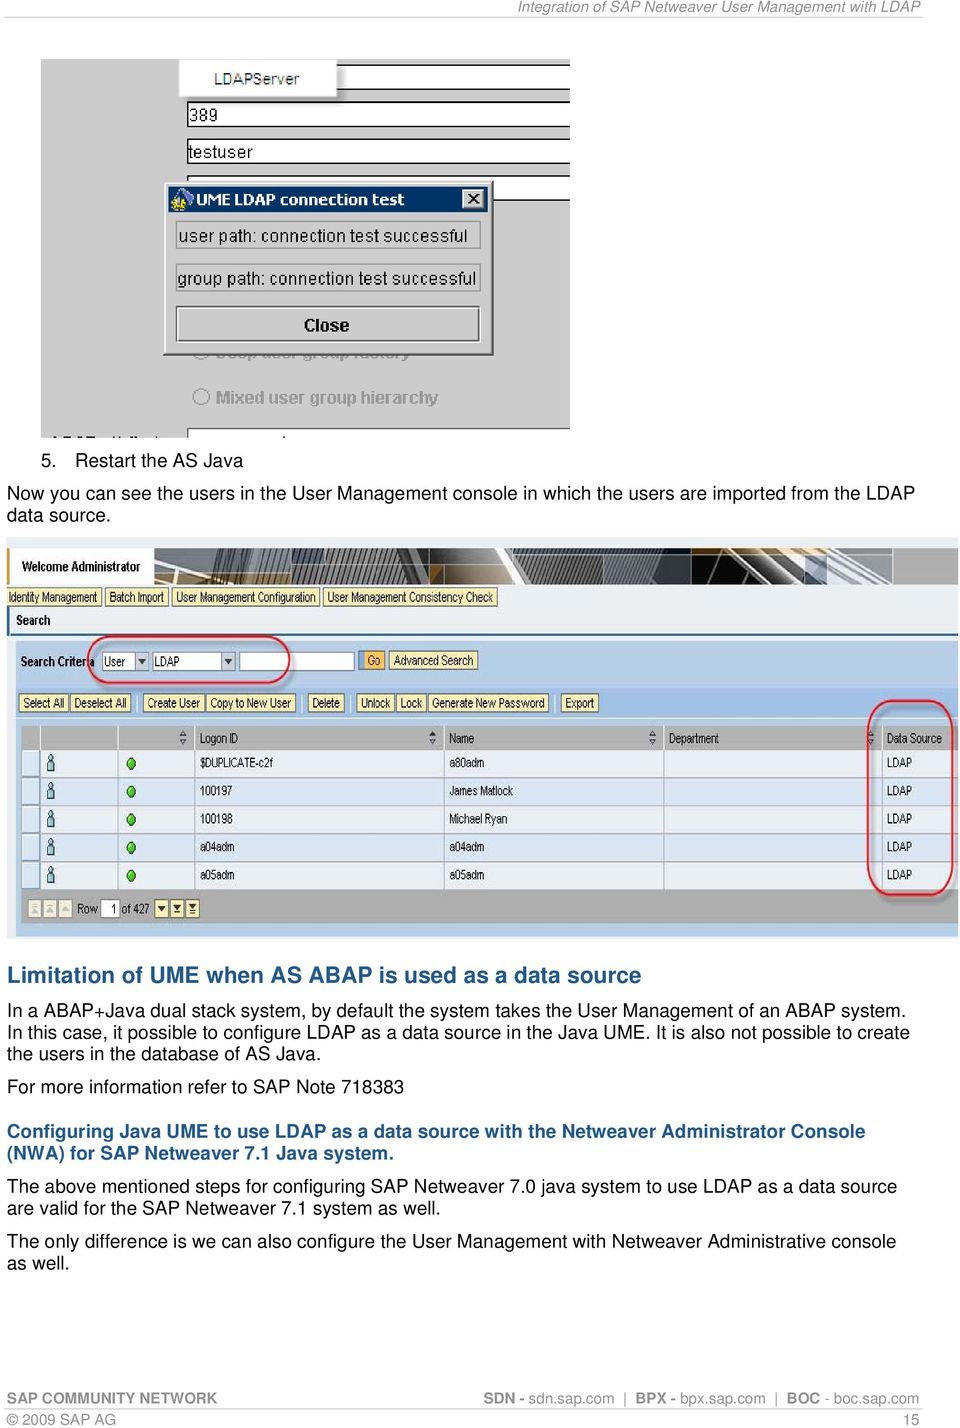 In this case, it possible to configure LDAP as a data source in the Java UME. It is also not possible to create the users in the database of AS Java.